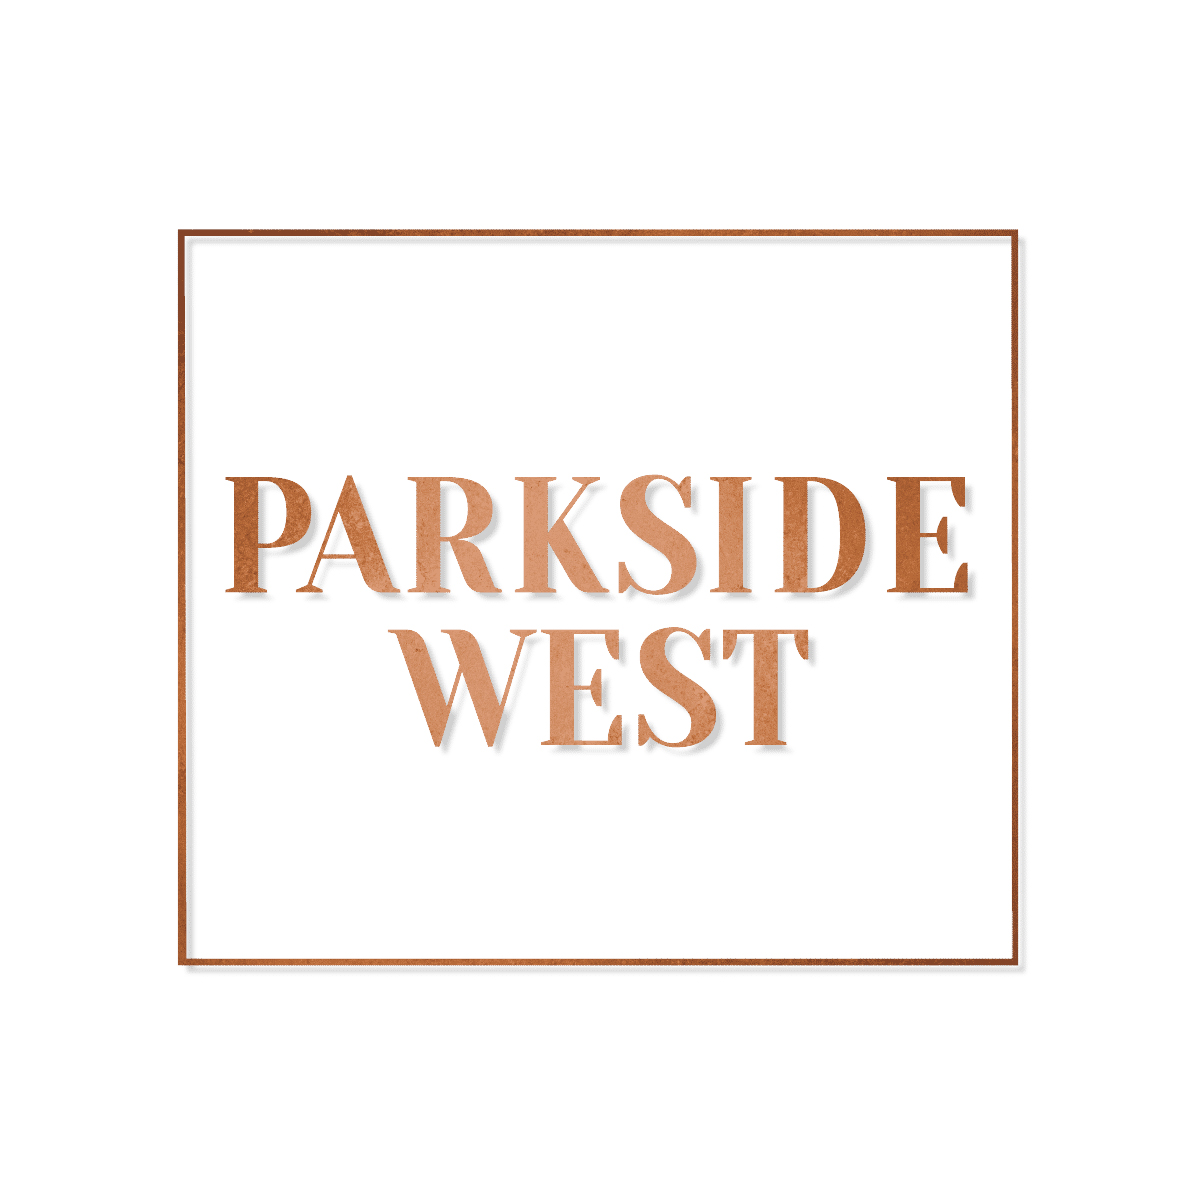 Parkside West coming soon